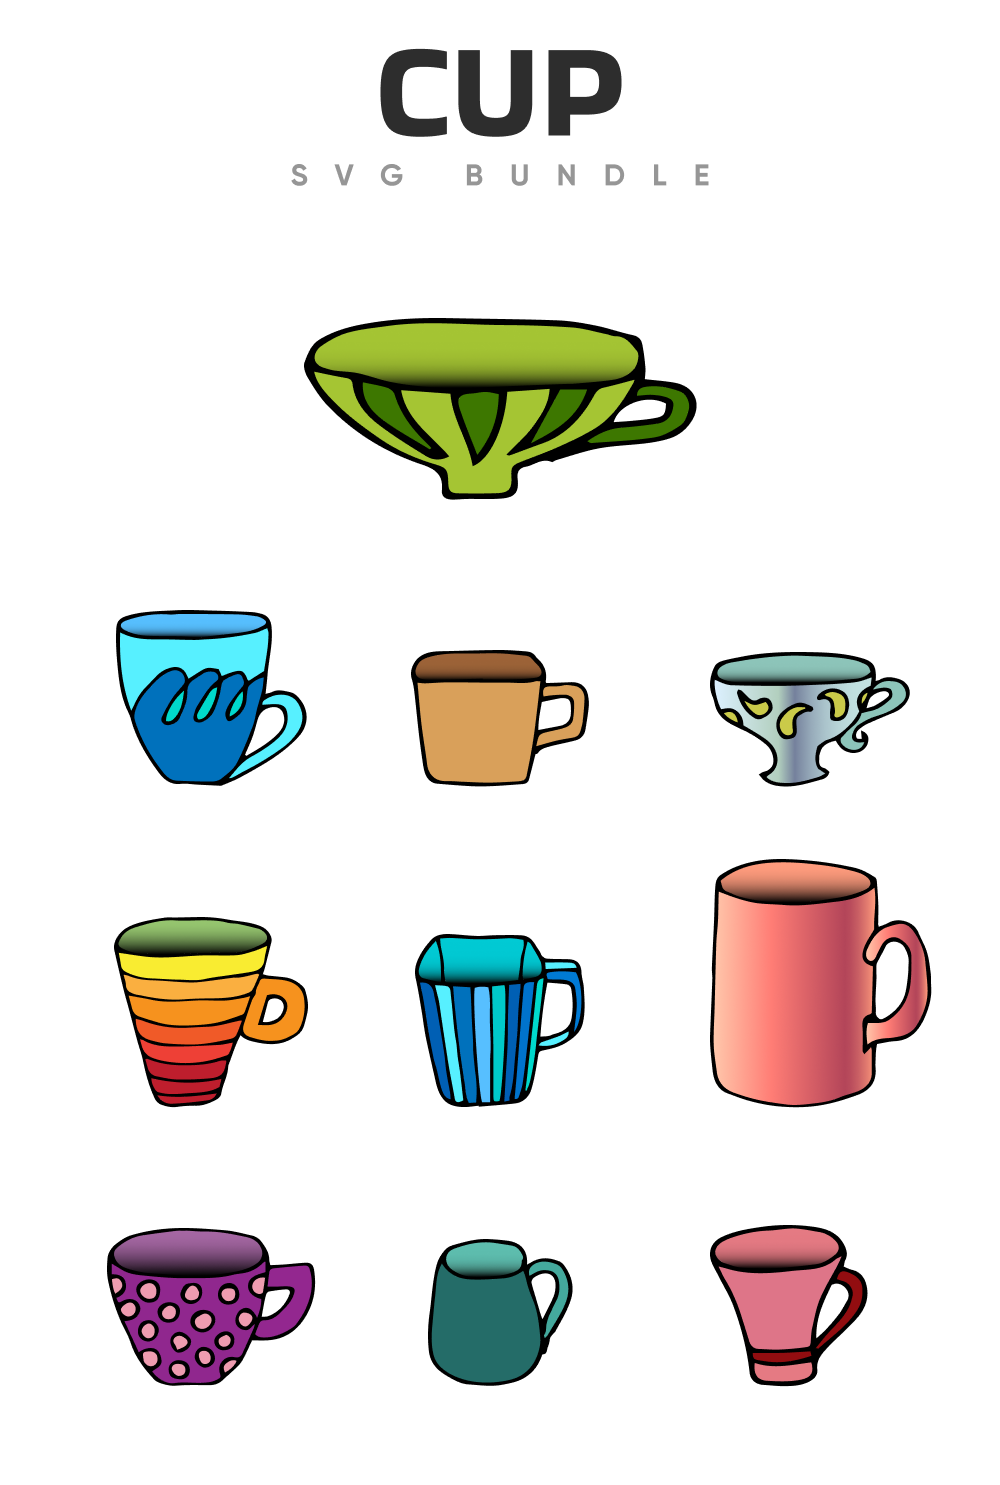 Diverse of the colorful cups.